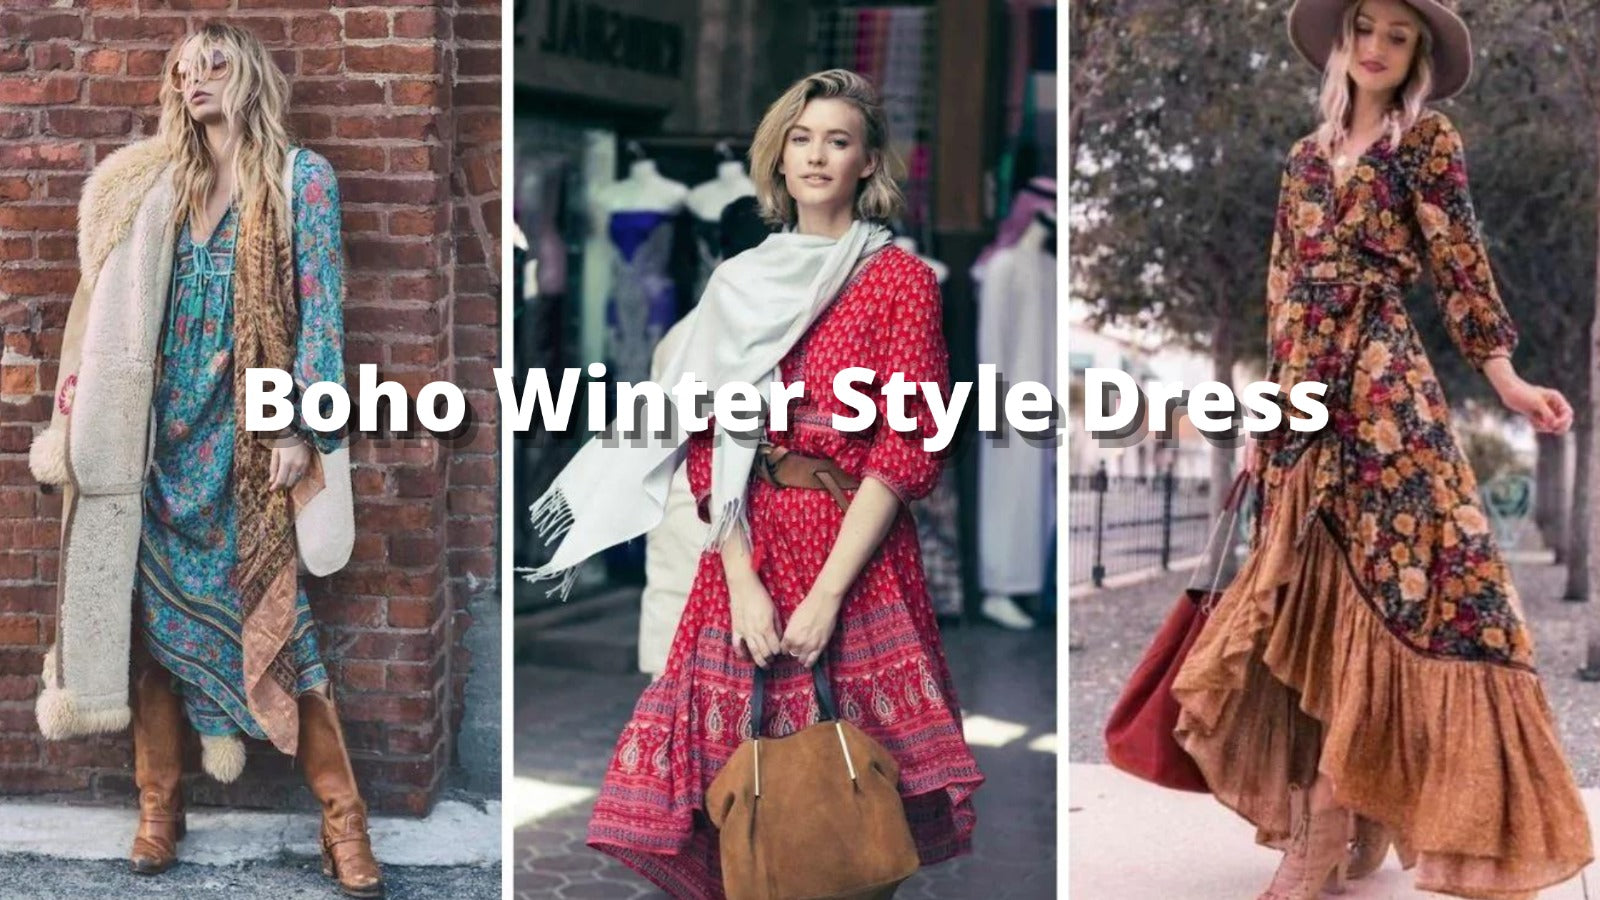 How to wear the boho winter style dress?